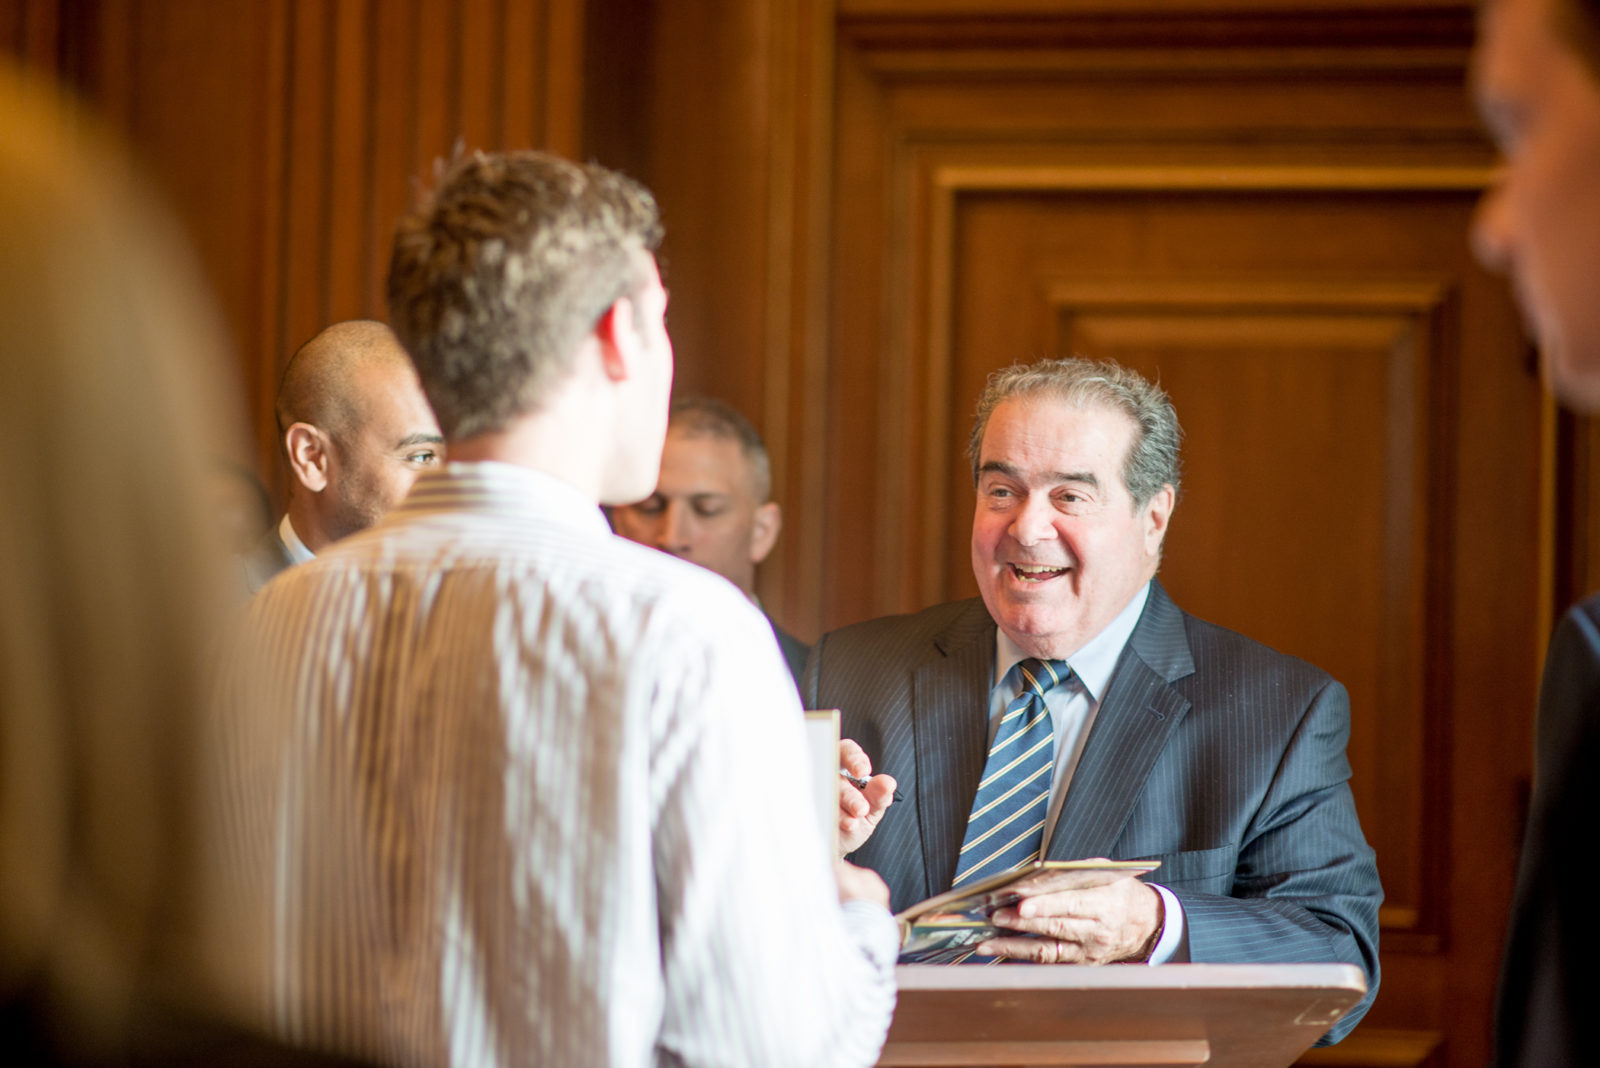 U.S. Supreme Court Justice Antonin Scalia signs a book for an LSI student following a briefing on Capitol Hill in May